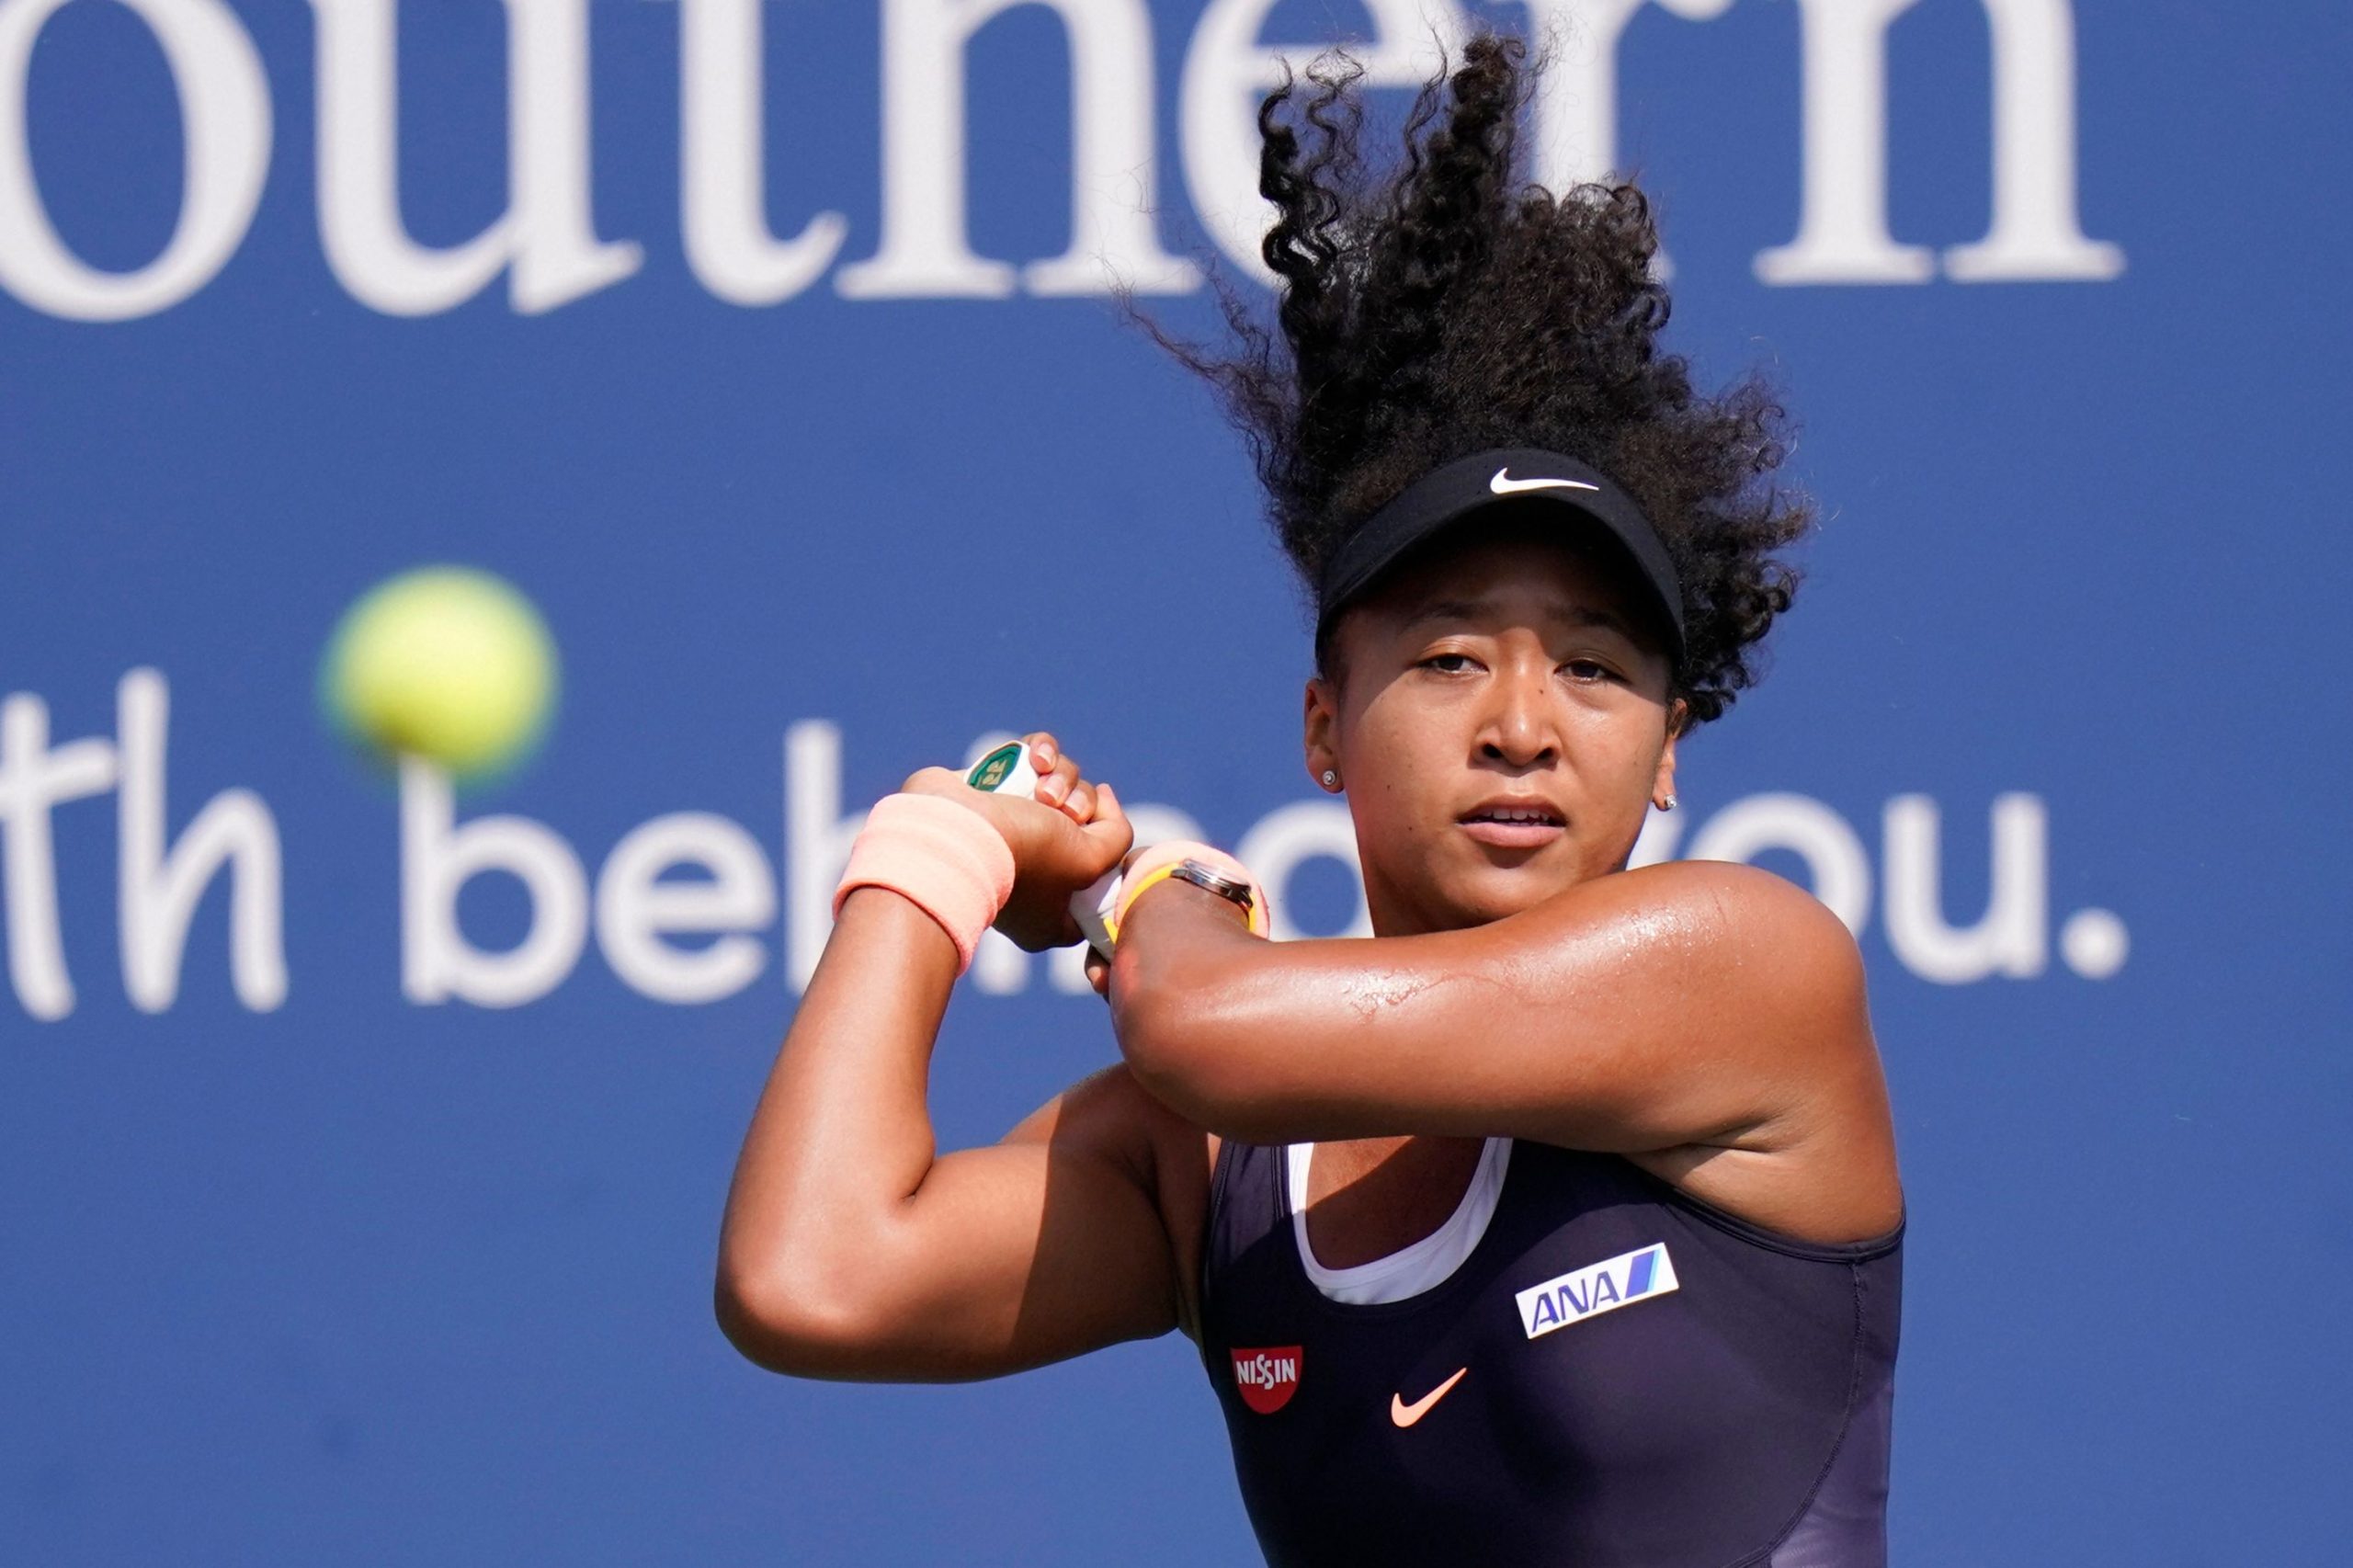 Naomi Osaka: An advocate for racial justice and a fireball on court